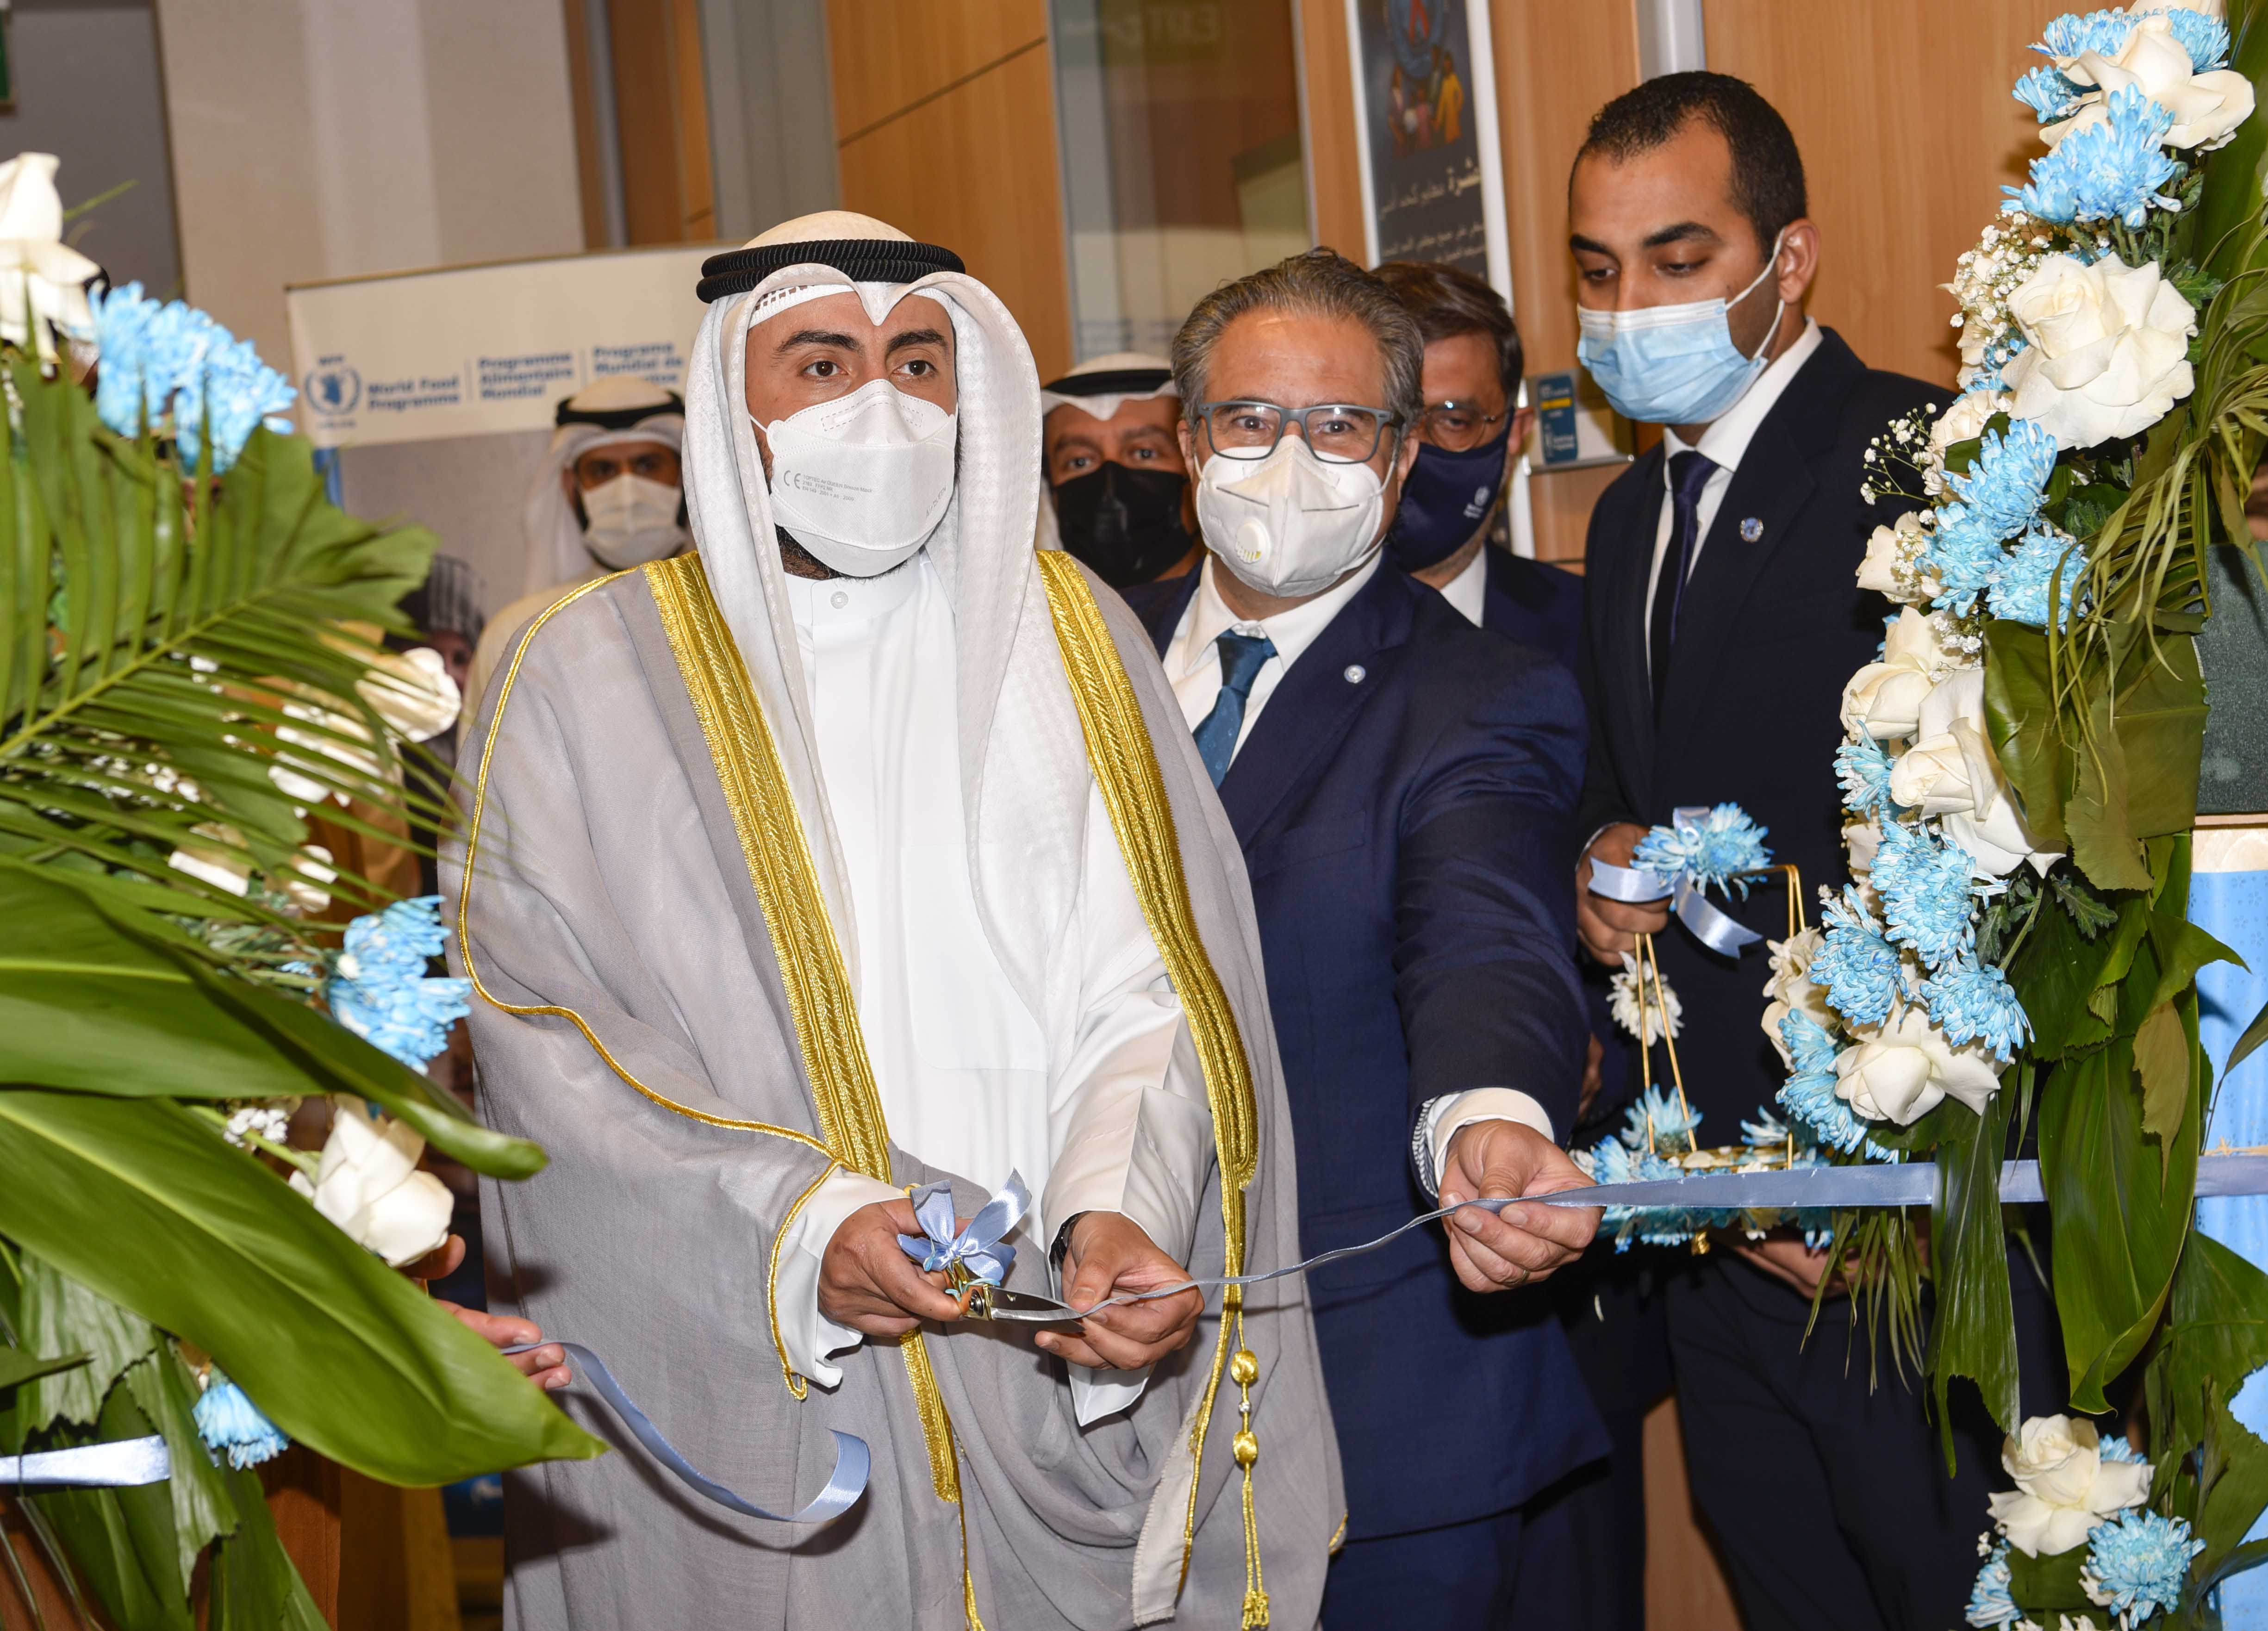 Health Minister Sheikh Dr. Basel Al-Sabah in the ceremony for inauguration of (WHO) headquarters